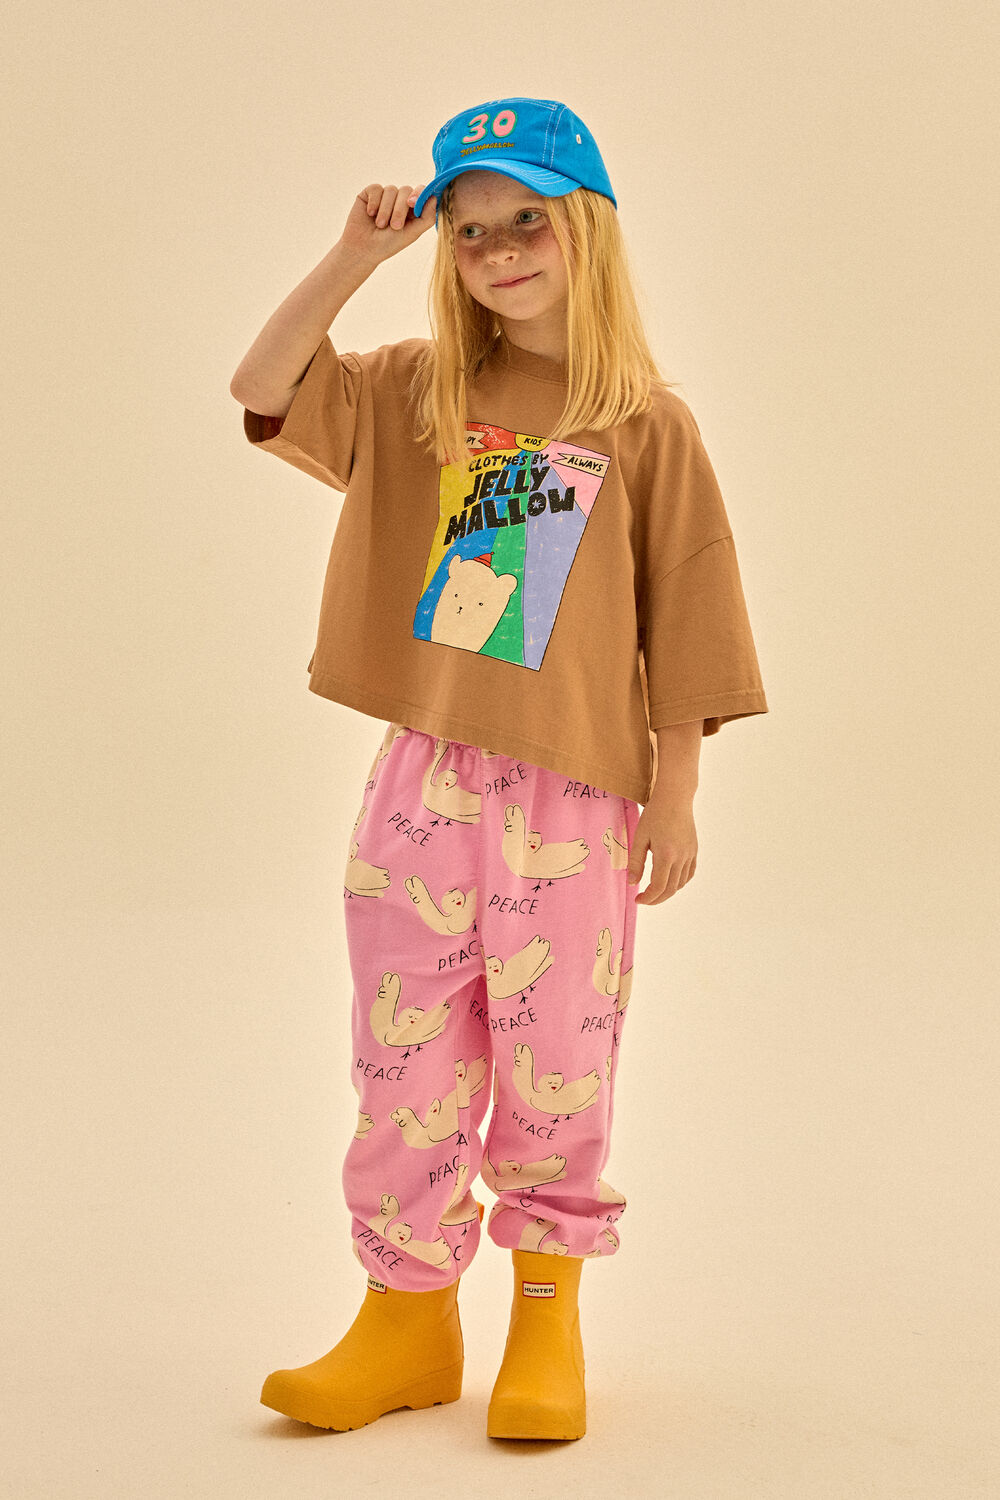 Jelly Mallow Meisjes Tops & T-shirts Cereal T-shirt Bruin-9Y